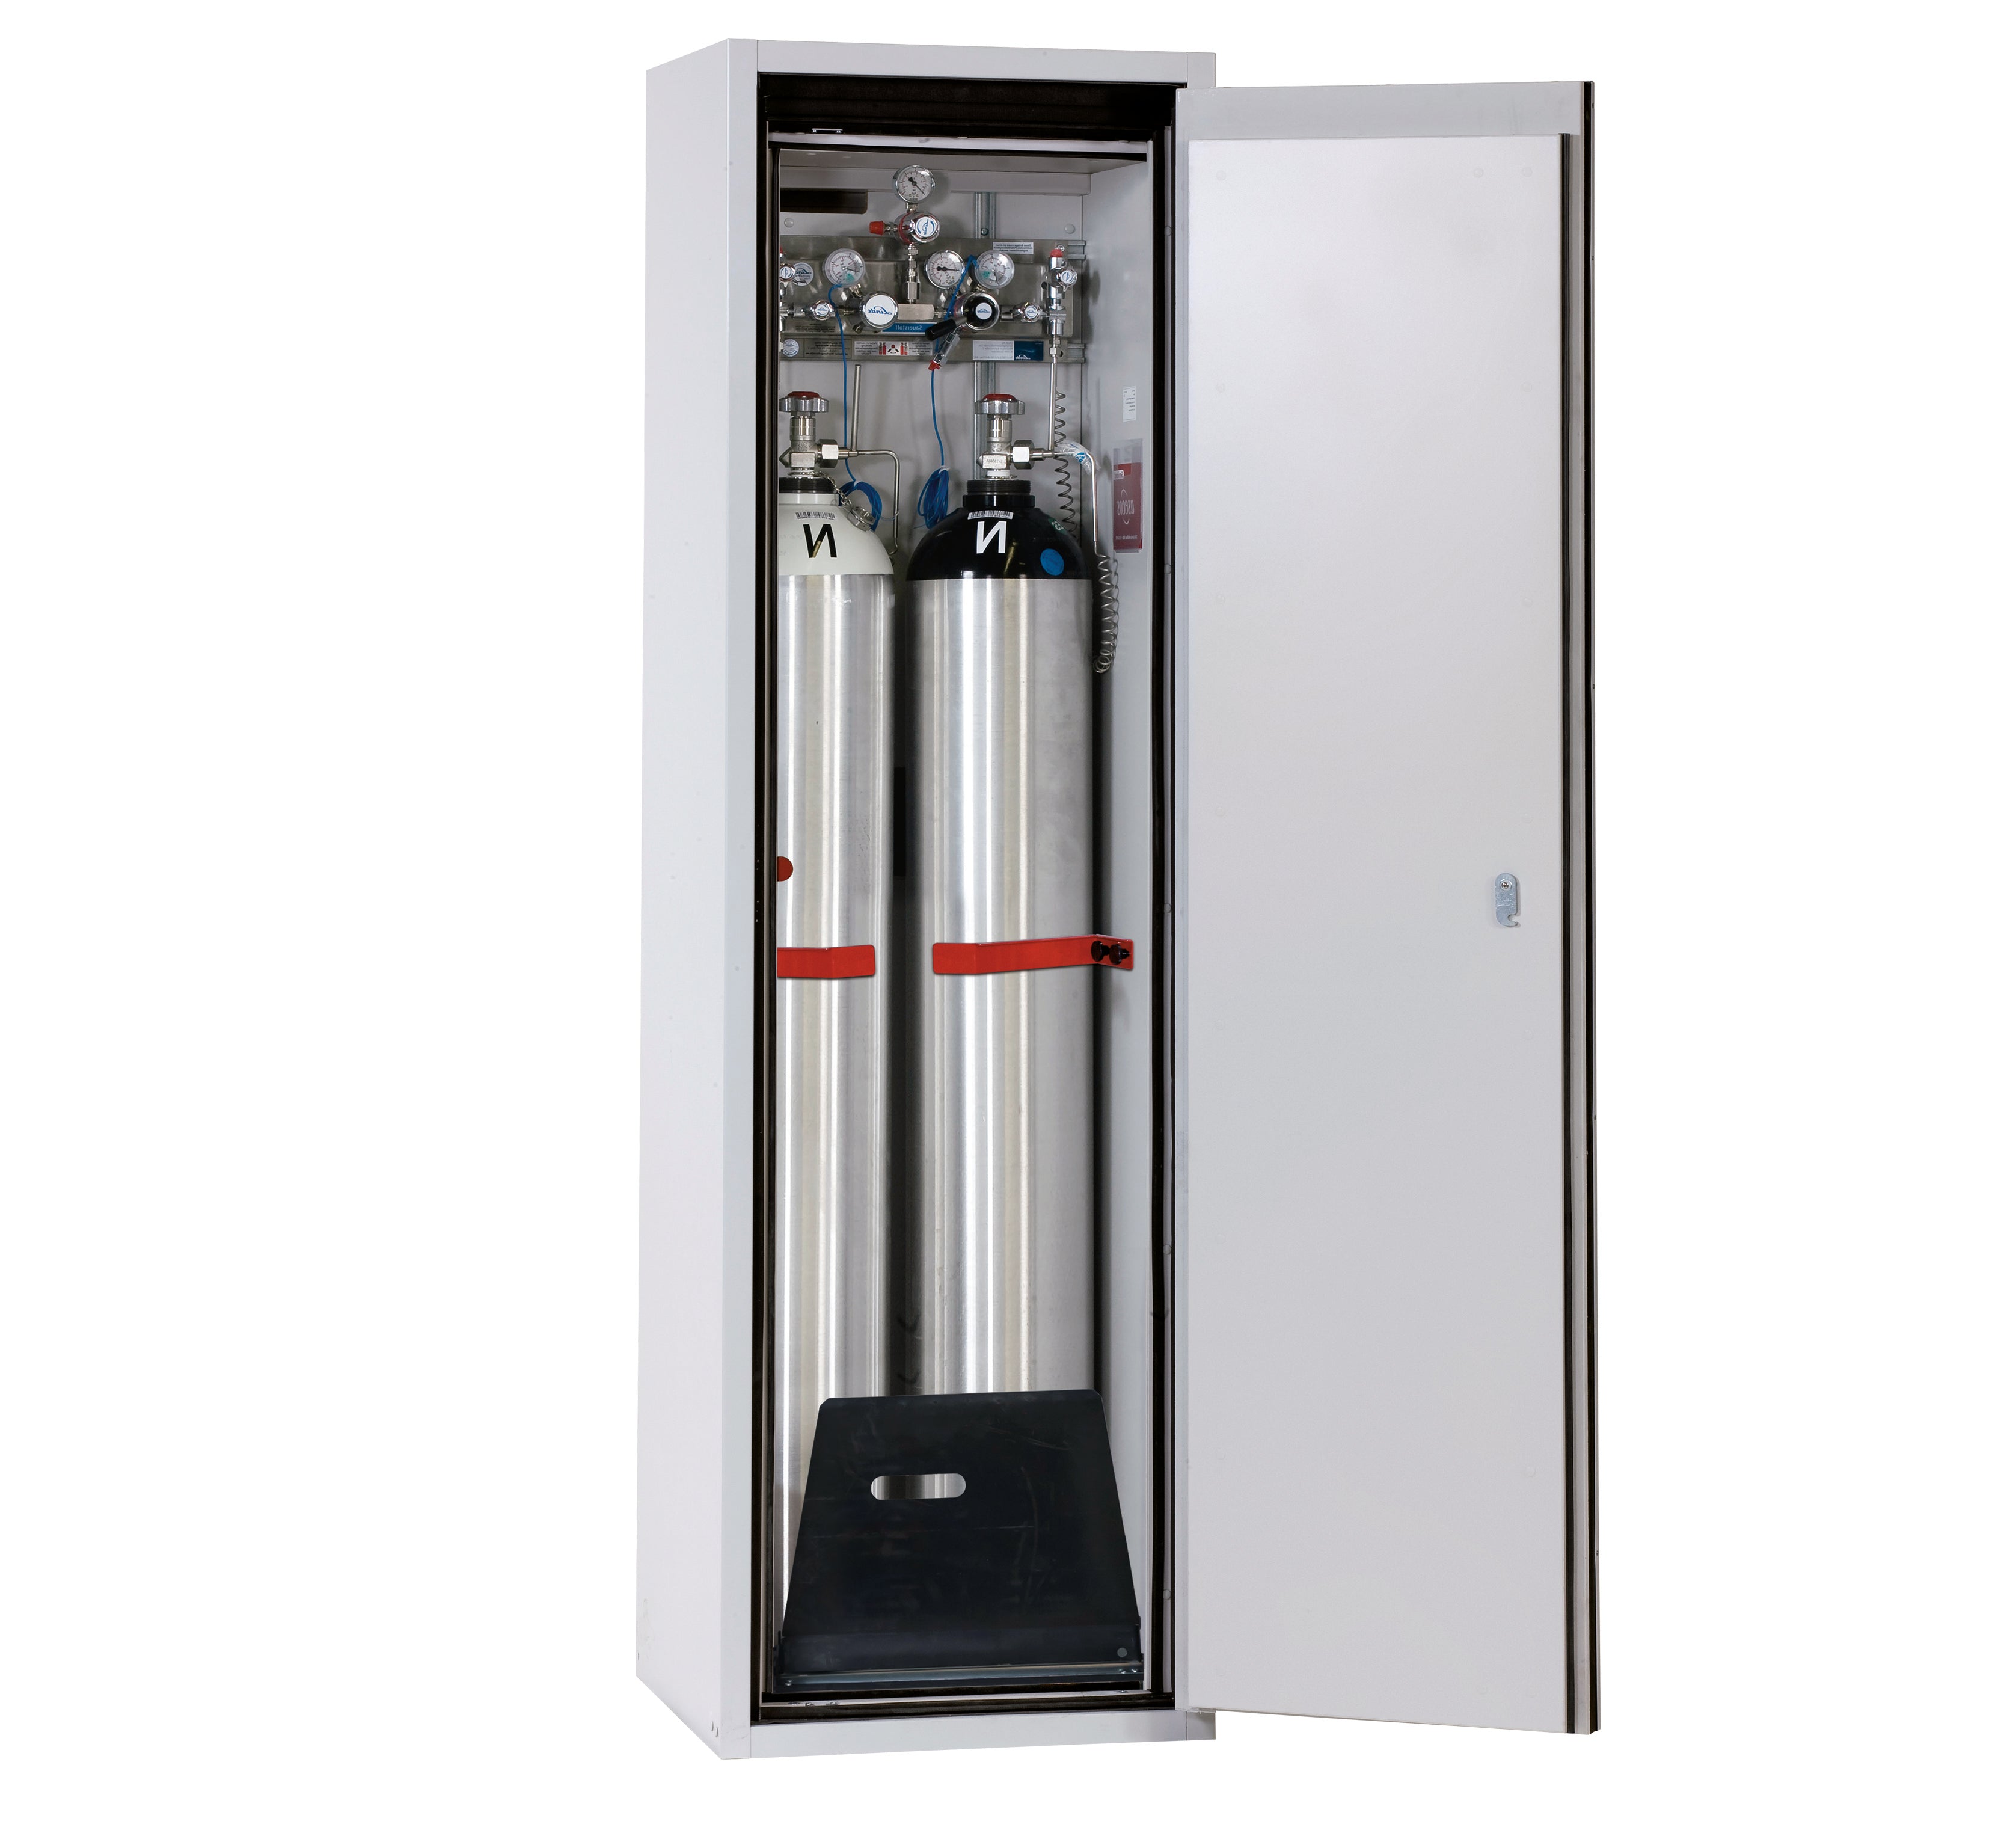 Type 90 compressed gas bottle cabinet G-ULTIMATE-90 model G90.205.060.2F.R in light gray RAL 7035 with standard interior fittings for 2x compressed gas bottles of 50 liters each